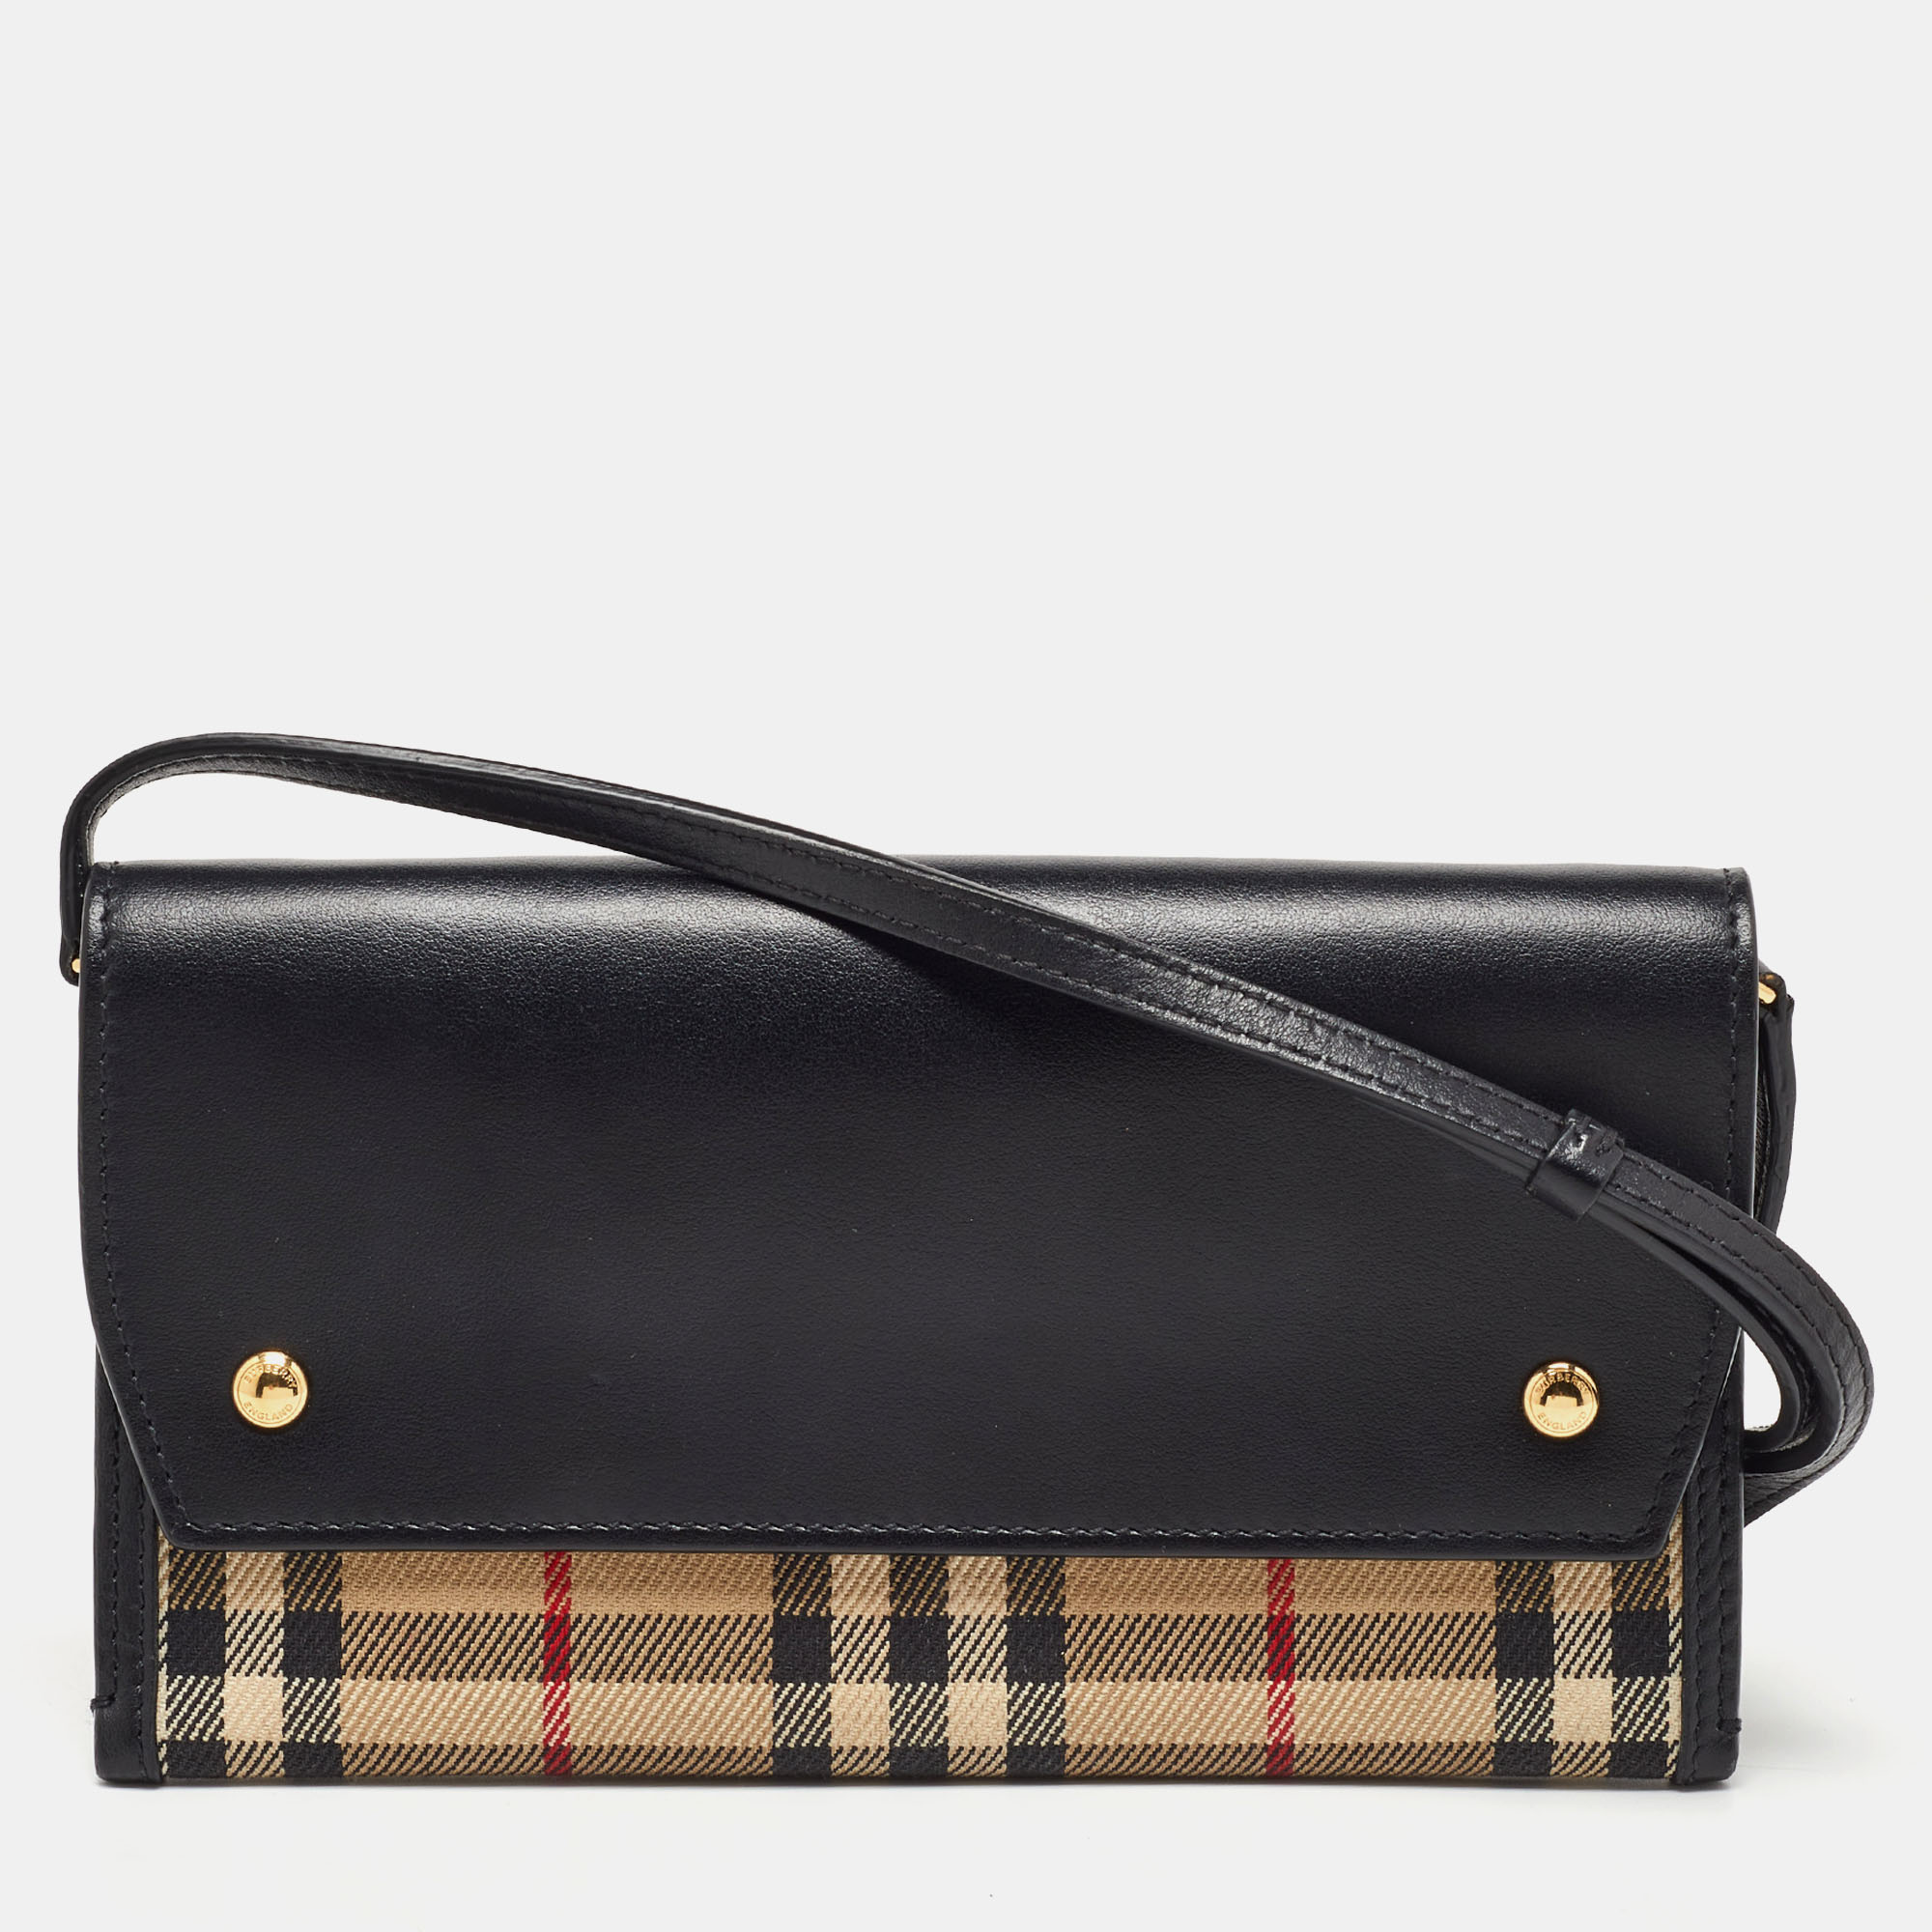 Burberry Black/Beige 1983 Knight Check Canvas And Leather Crossbody Bag